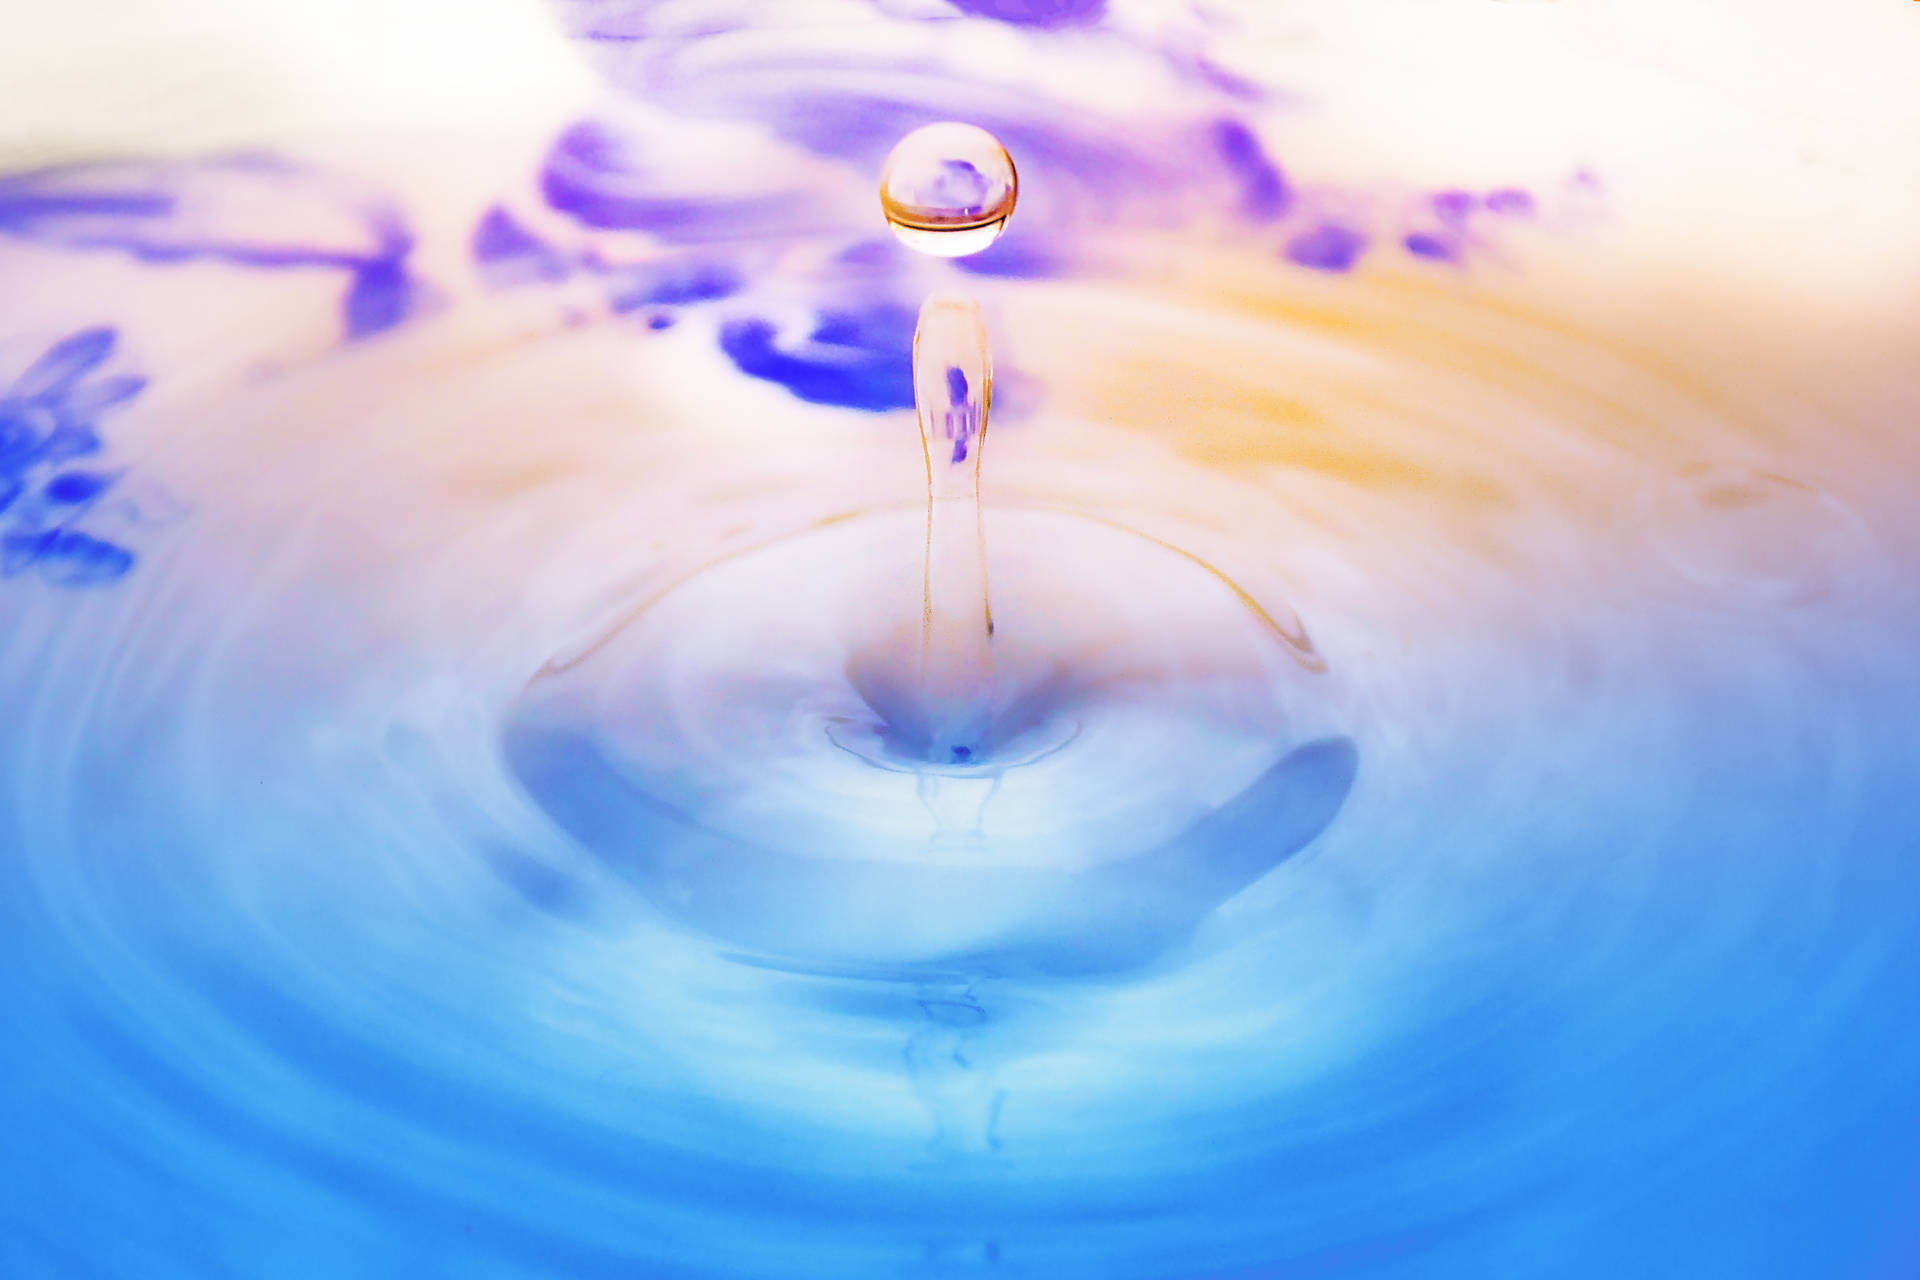 Vivid Strains Of Life: A Colorful Water Droplet